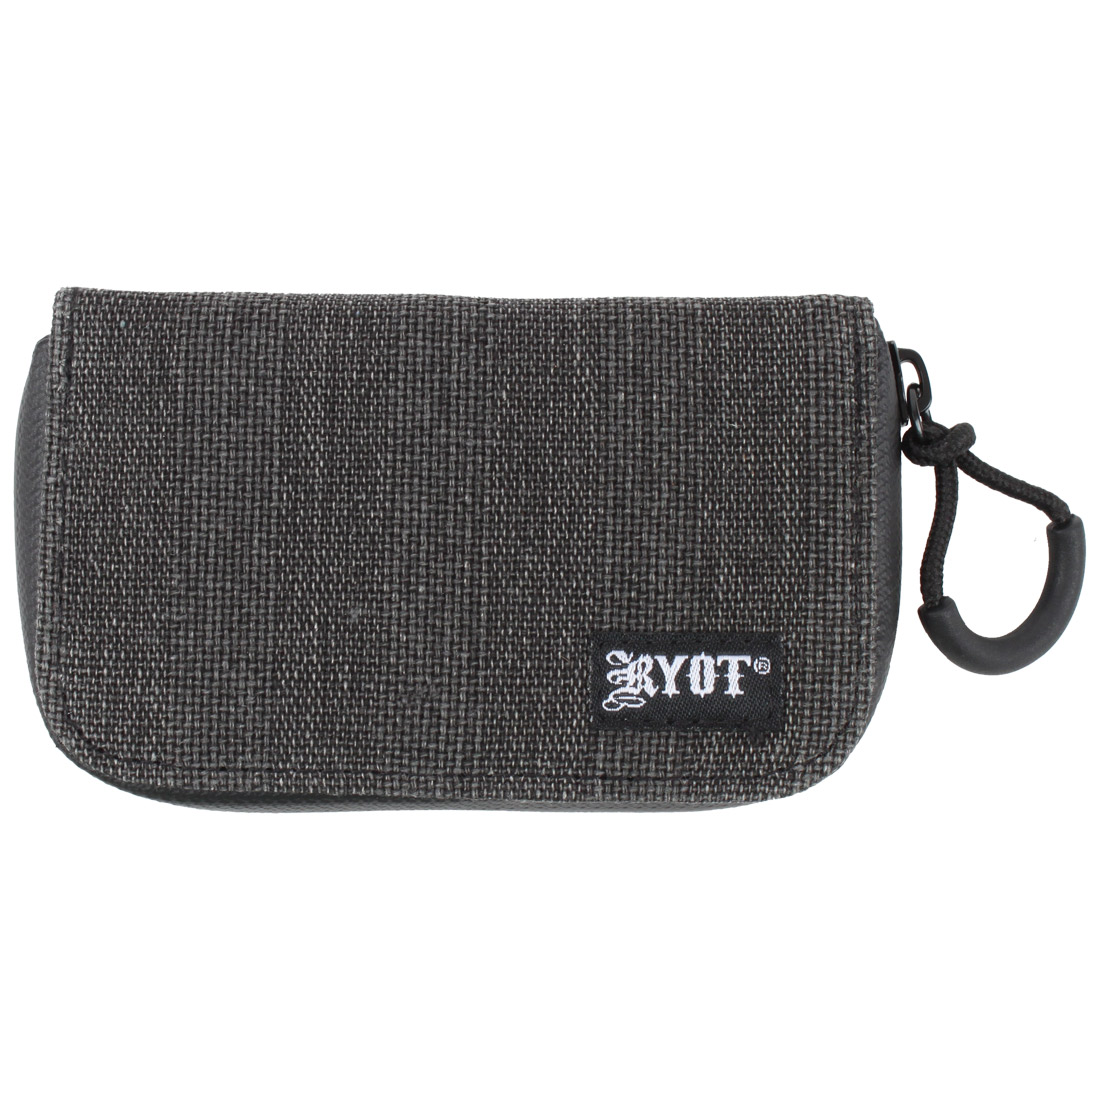 Why You Need the RYOT Krypto Kit Smell Safe Protection Case